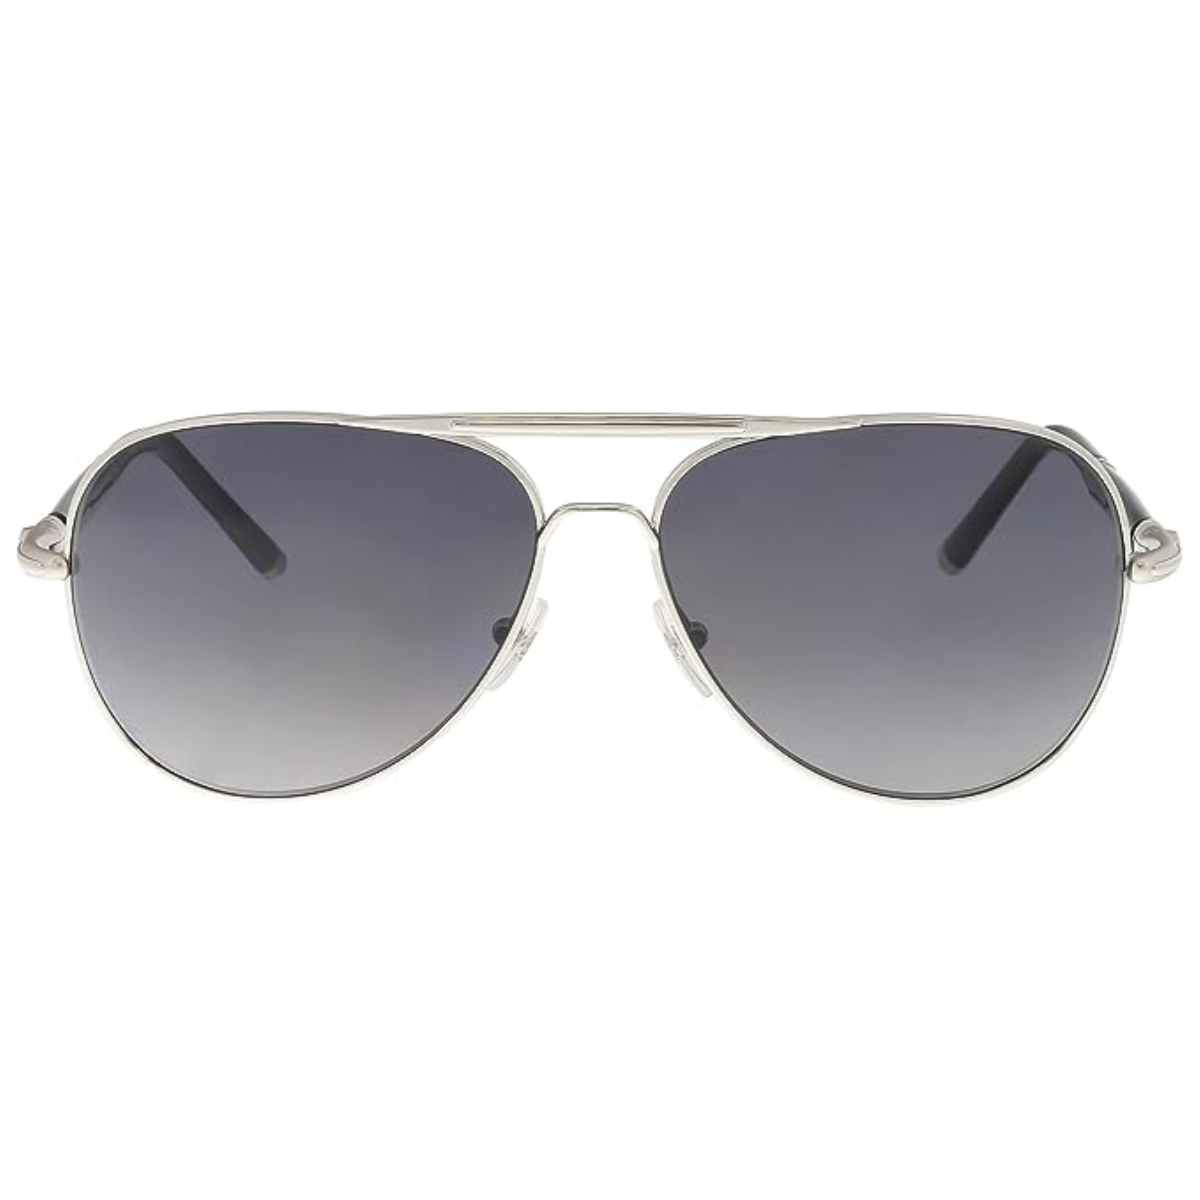 " Upgrade your style with Mont Blanc MB509S Aviator Sunglasses for Men at Optorium - top-quality materials and mirrored grey lens!"